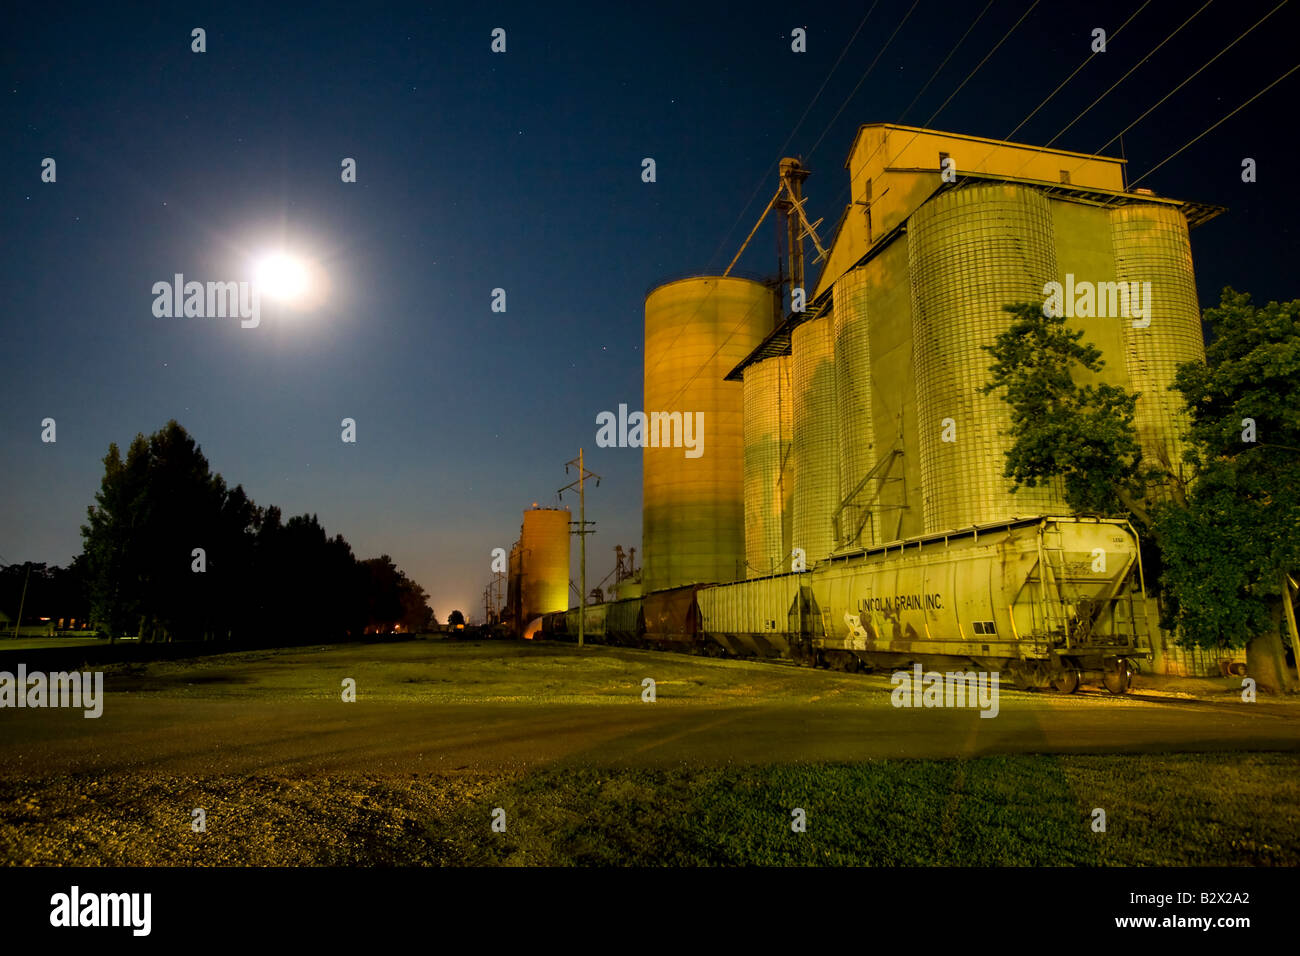 The large elevator at Clifton, IL is preparing to load railroad cars with grain under a full moon. Stock Photo